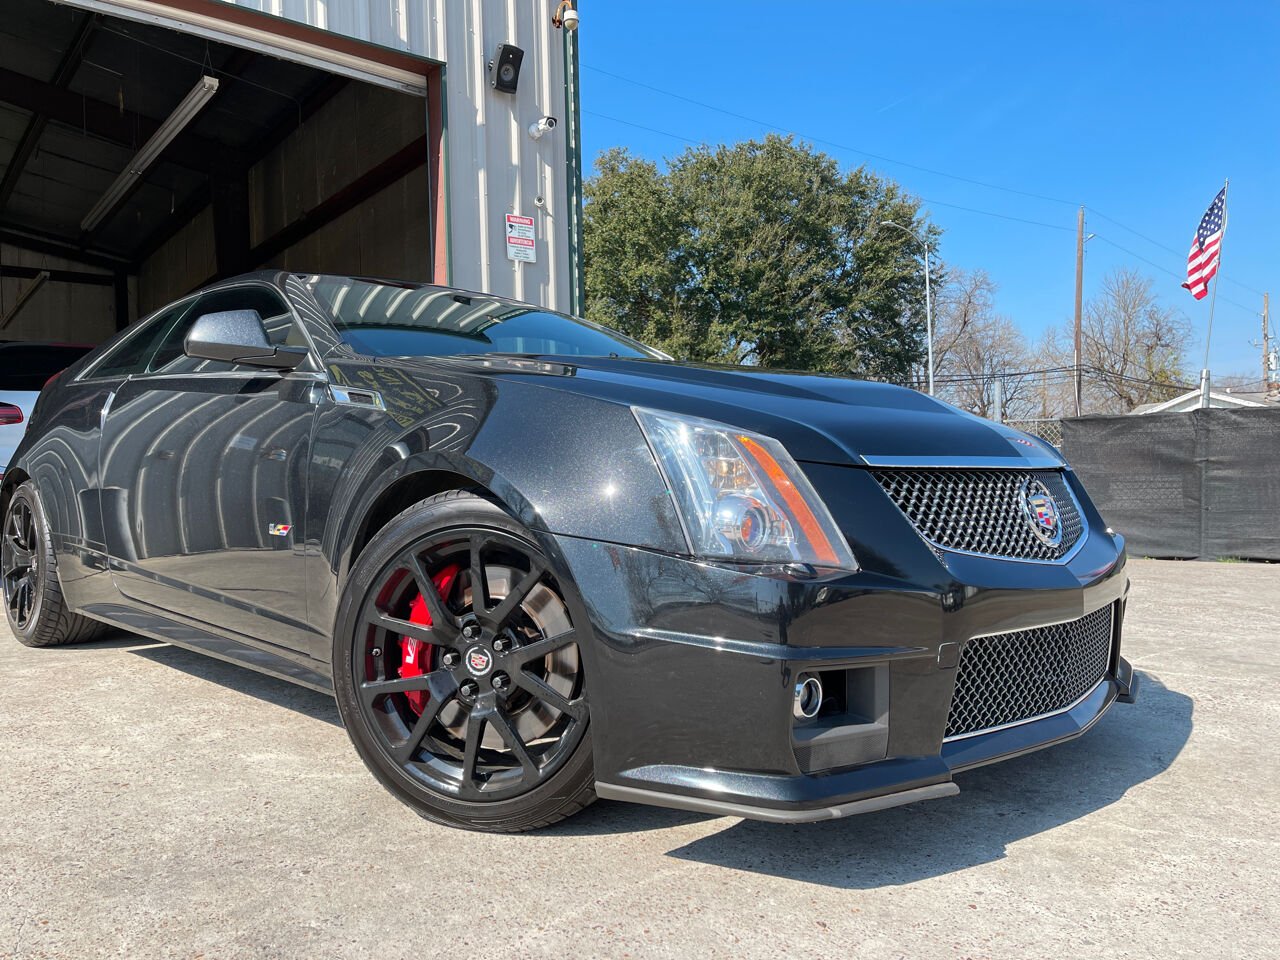 2015 Cadillac CTS-V For Sale - Carsforsale.com®